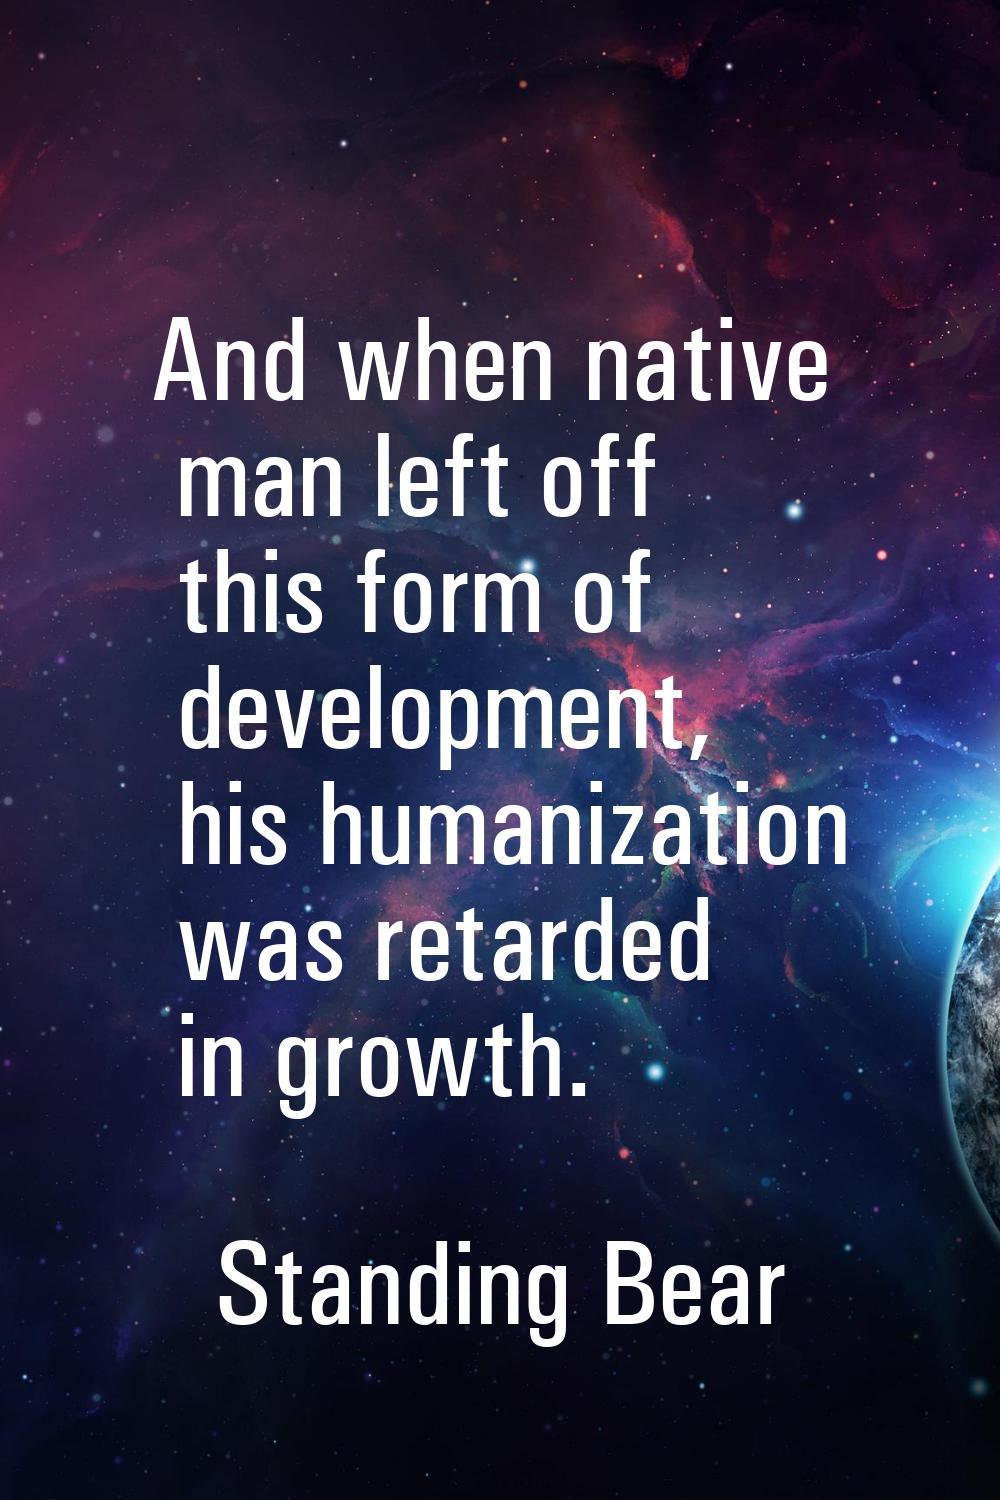 And when native man left off this form of development, his humanization was retarded in growth.